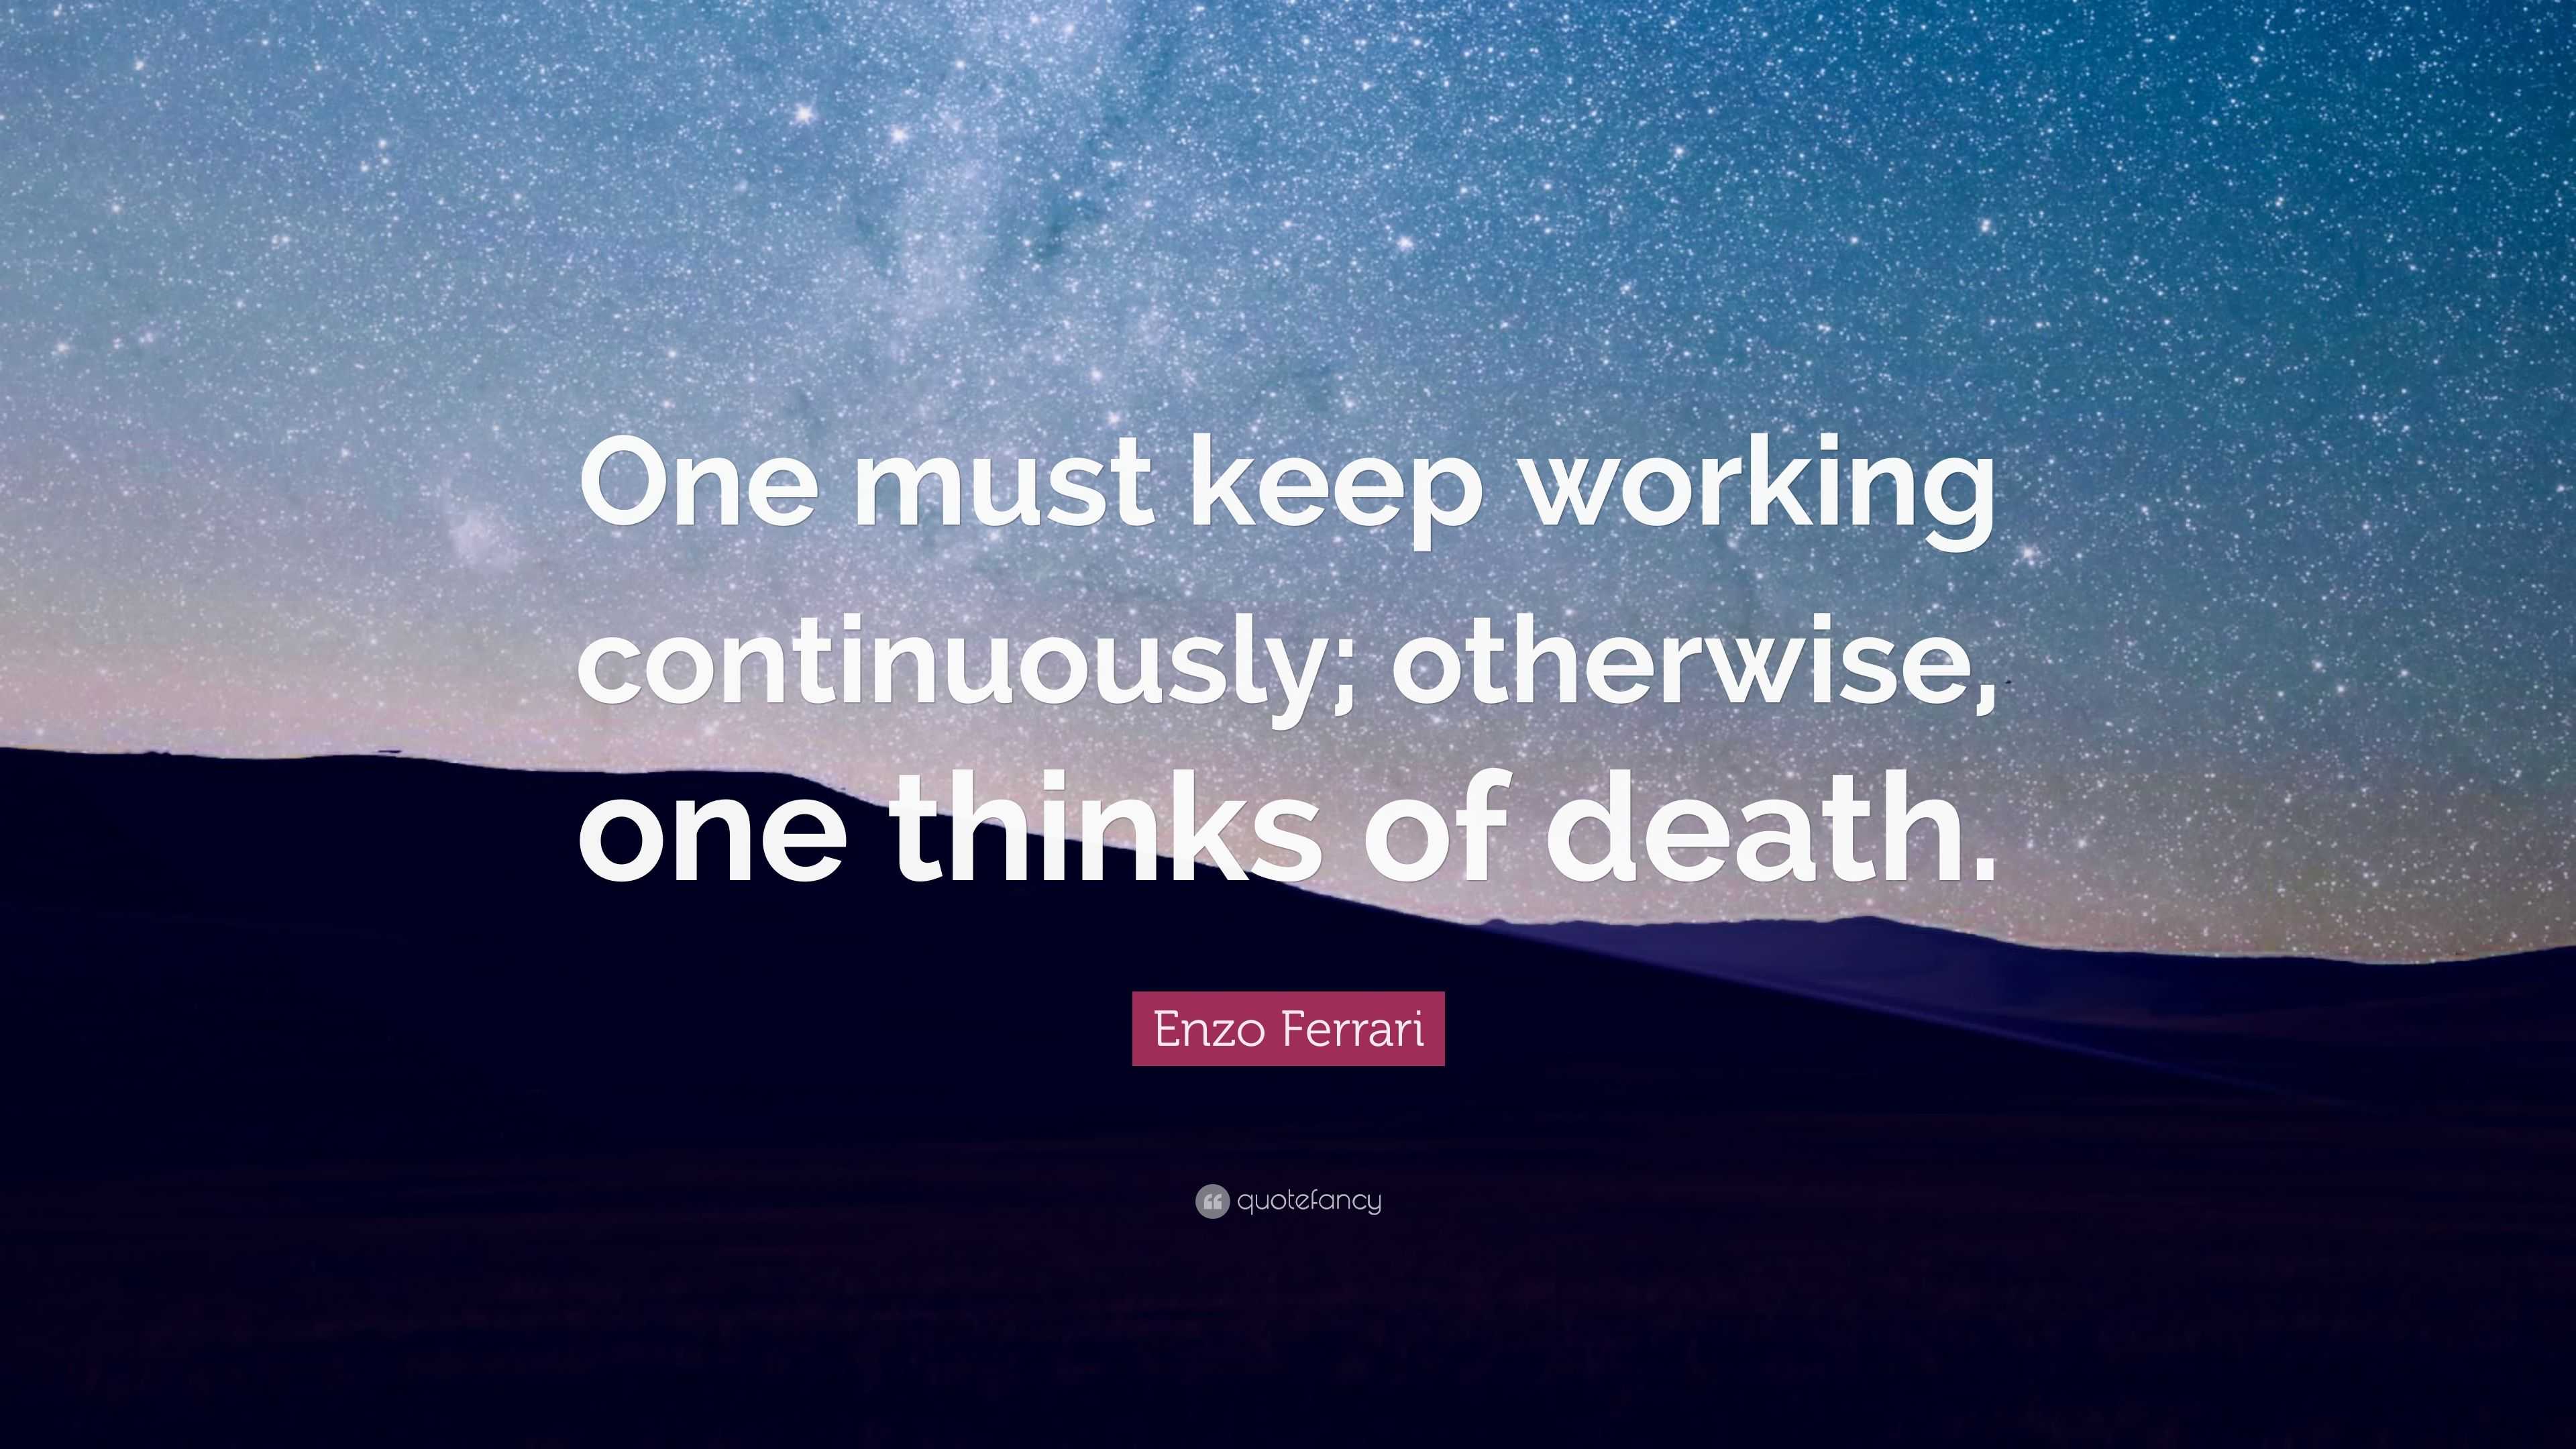 Enzo Ferrari Quote: "One must keep working continuously; otherwise, one thinks of death." (7 ...